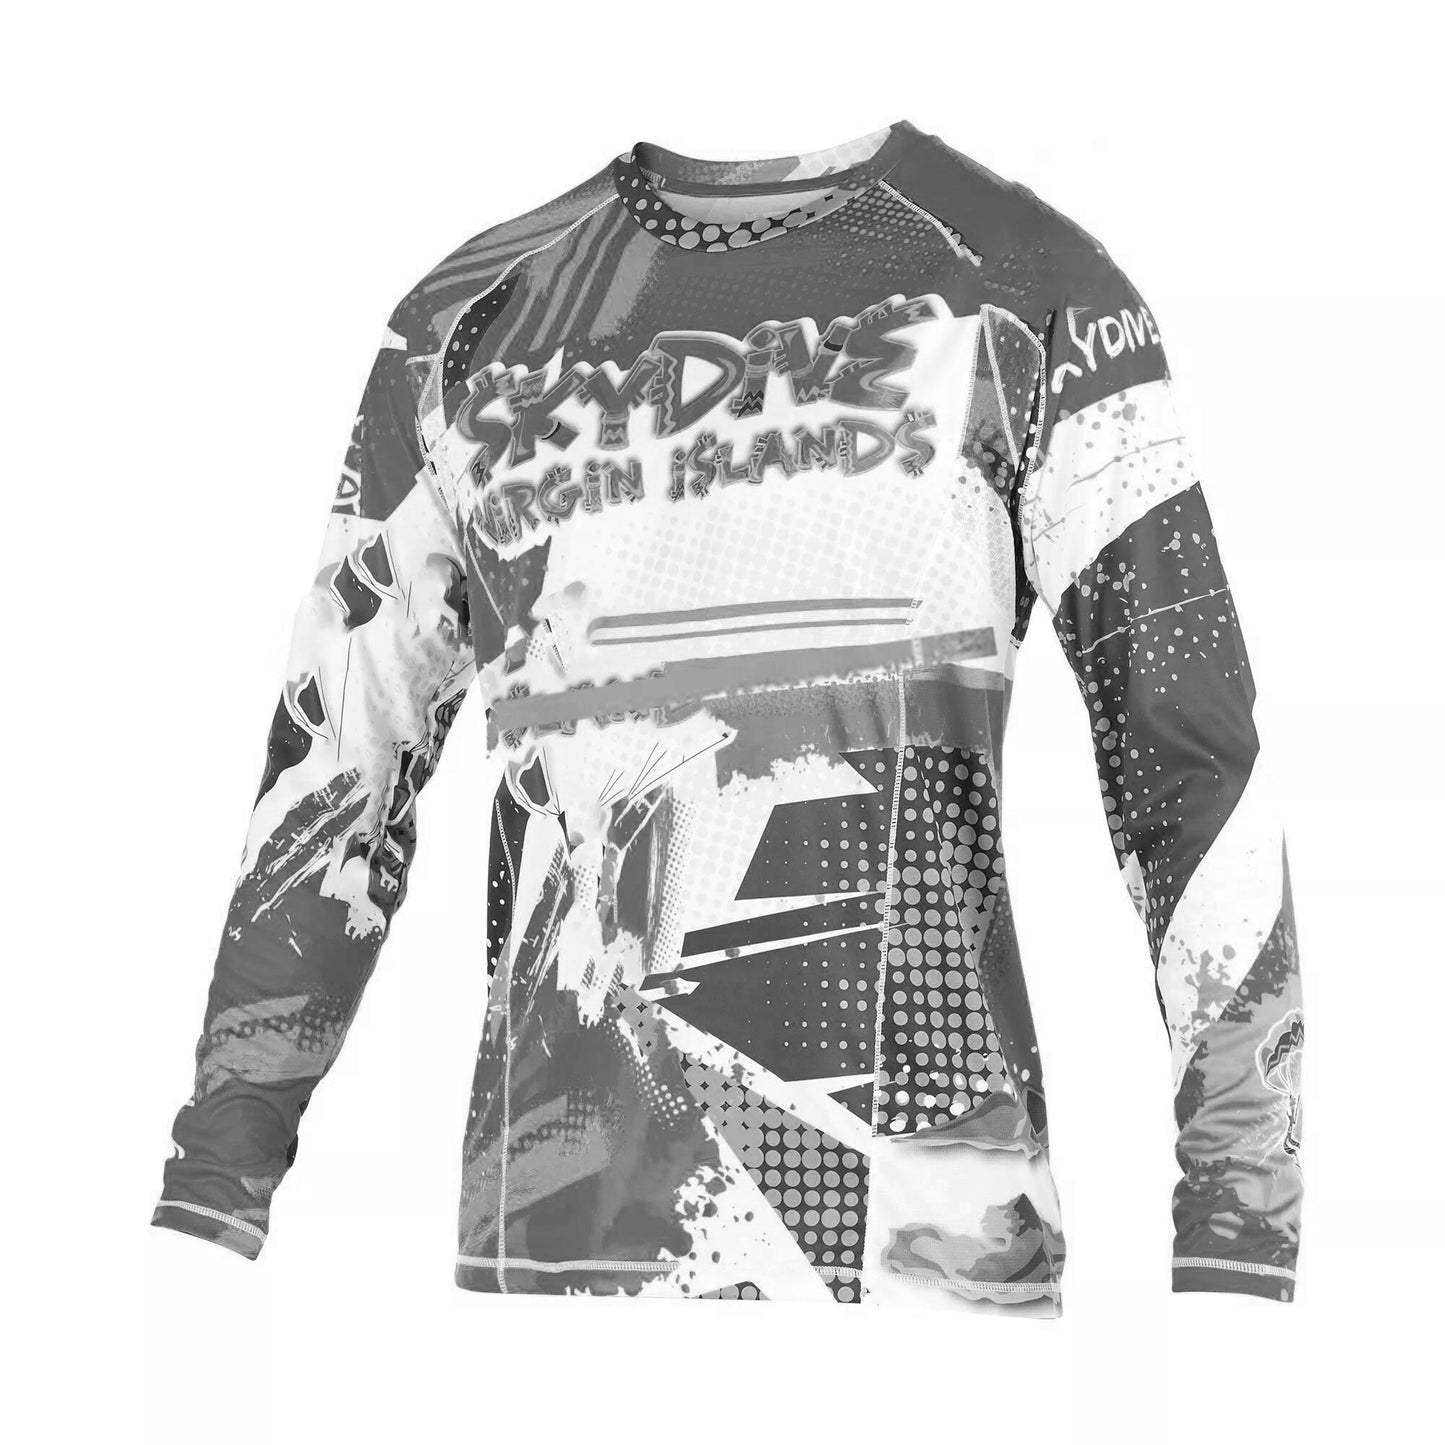 Skydiving sublimation printed jersey-022